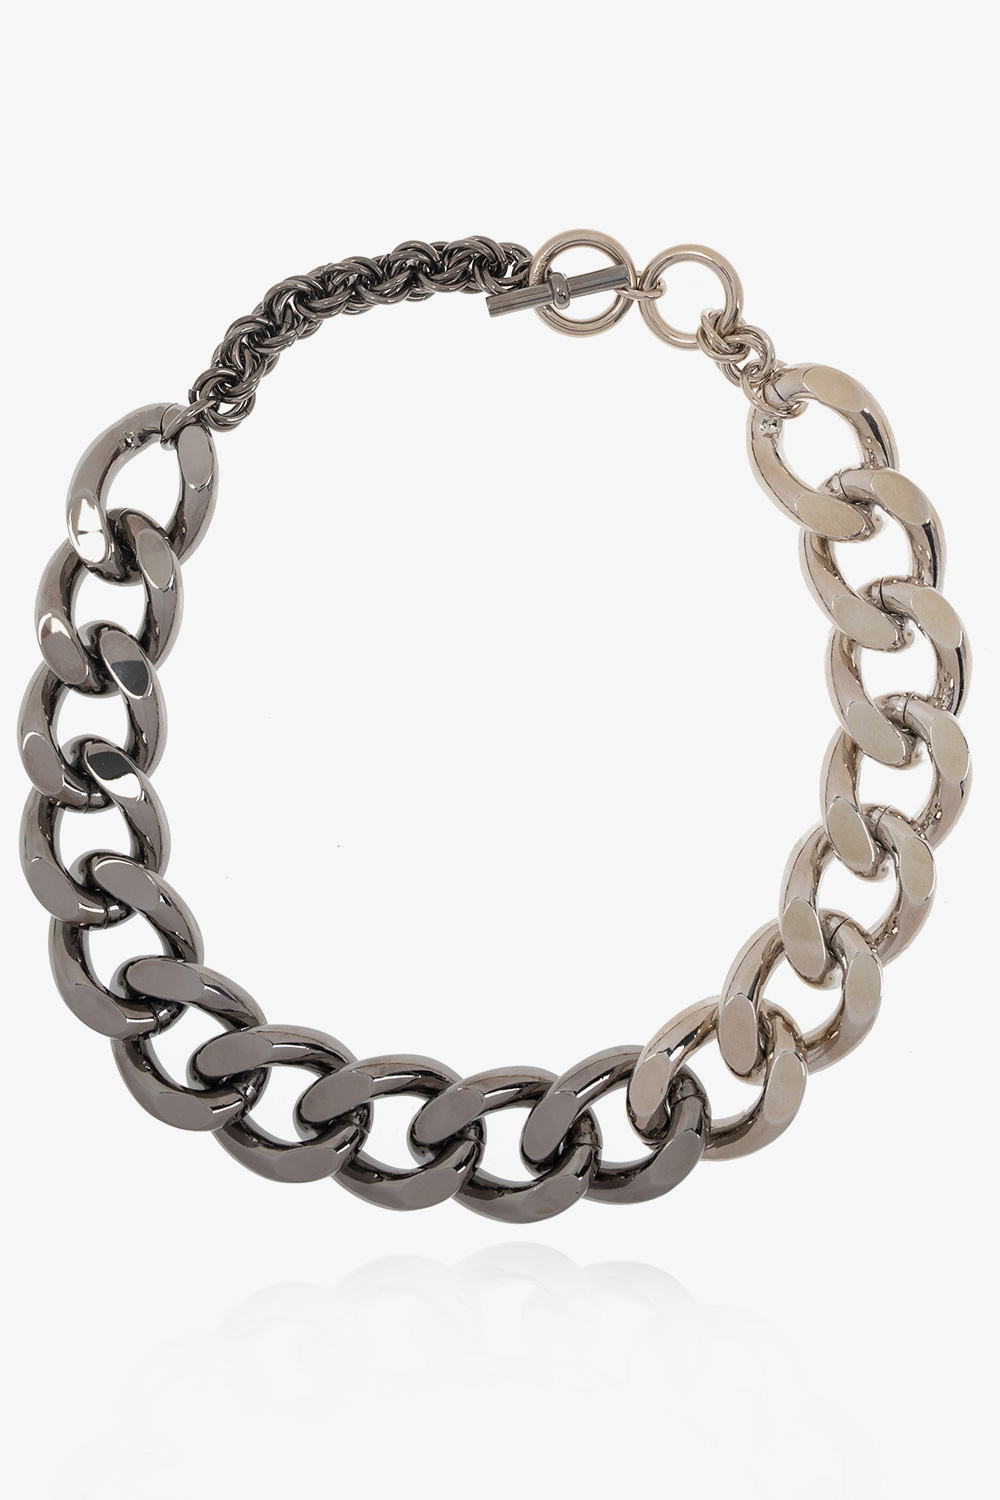 JW Anderson Chain necklace